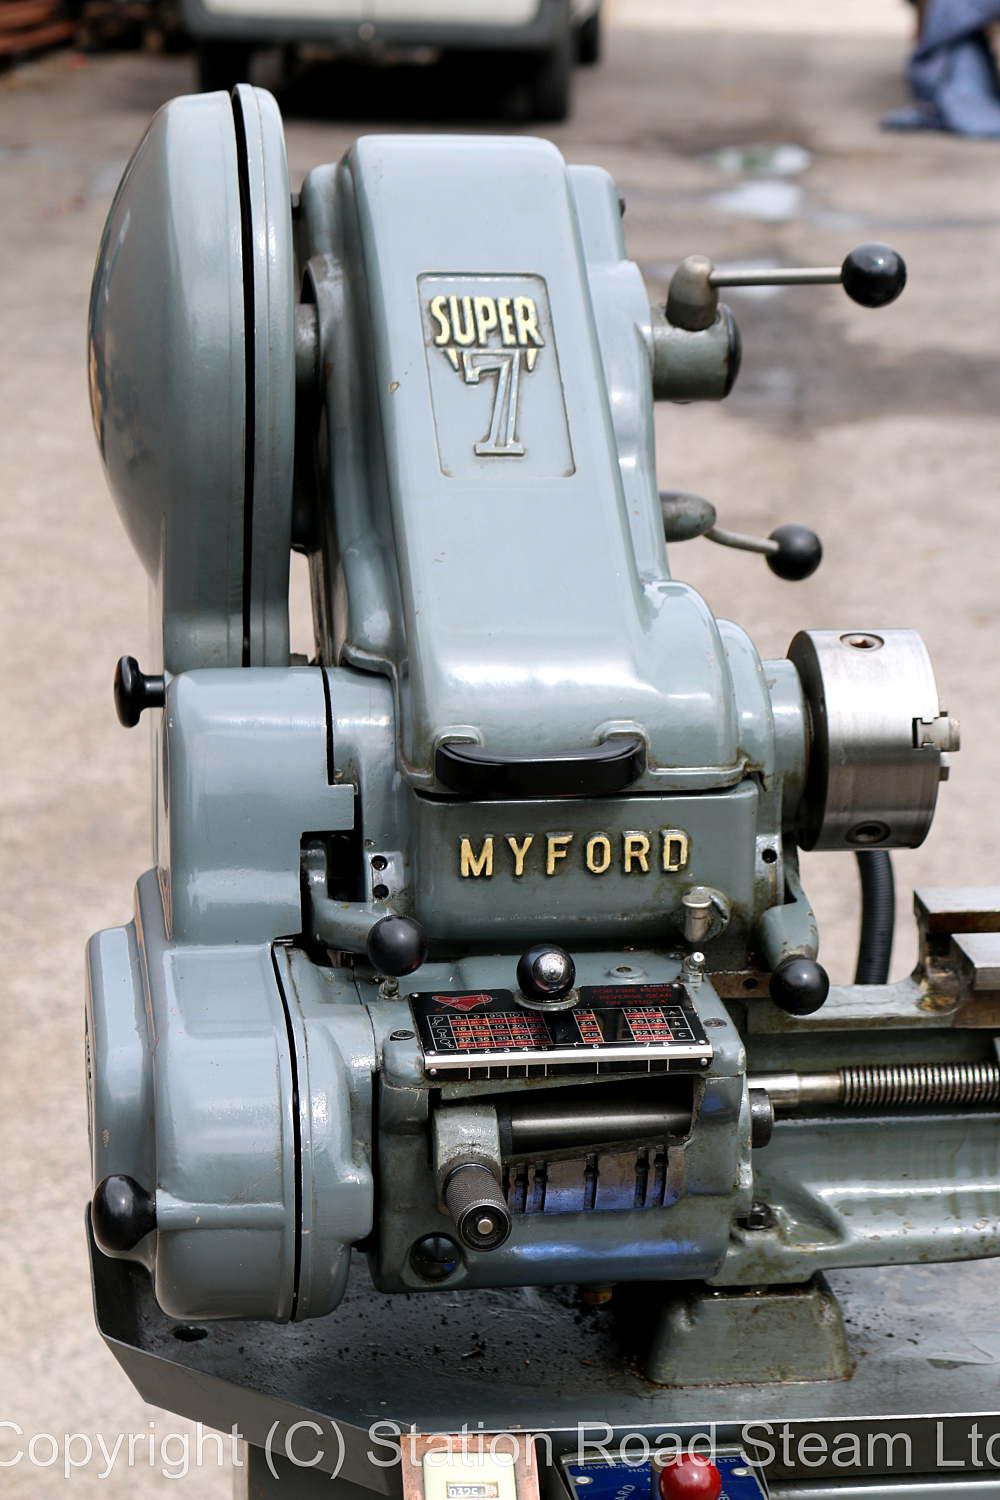 Myford Super 7B lathe on cabinet stand